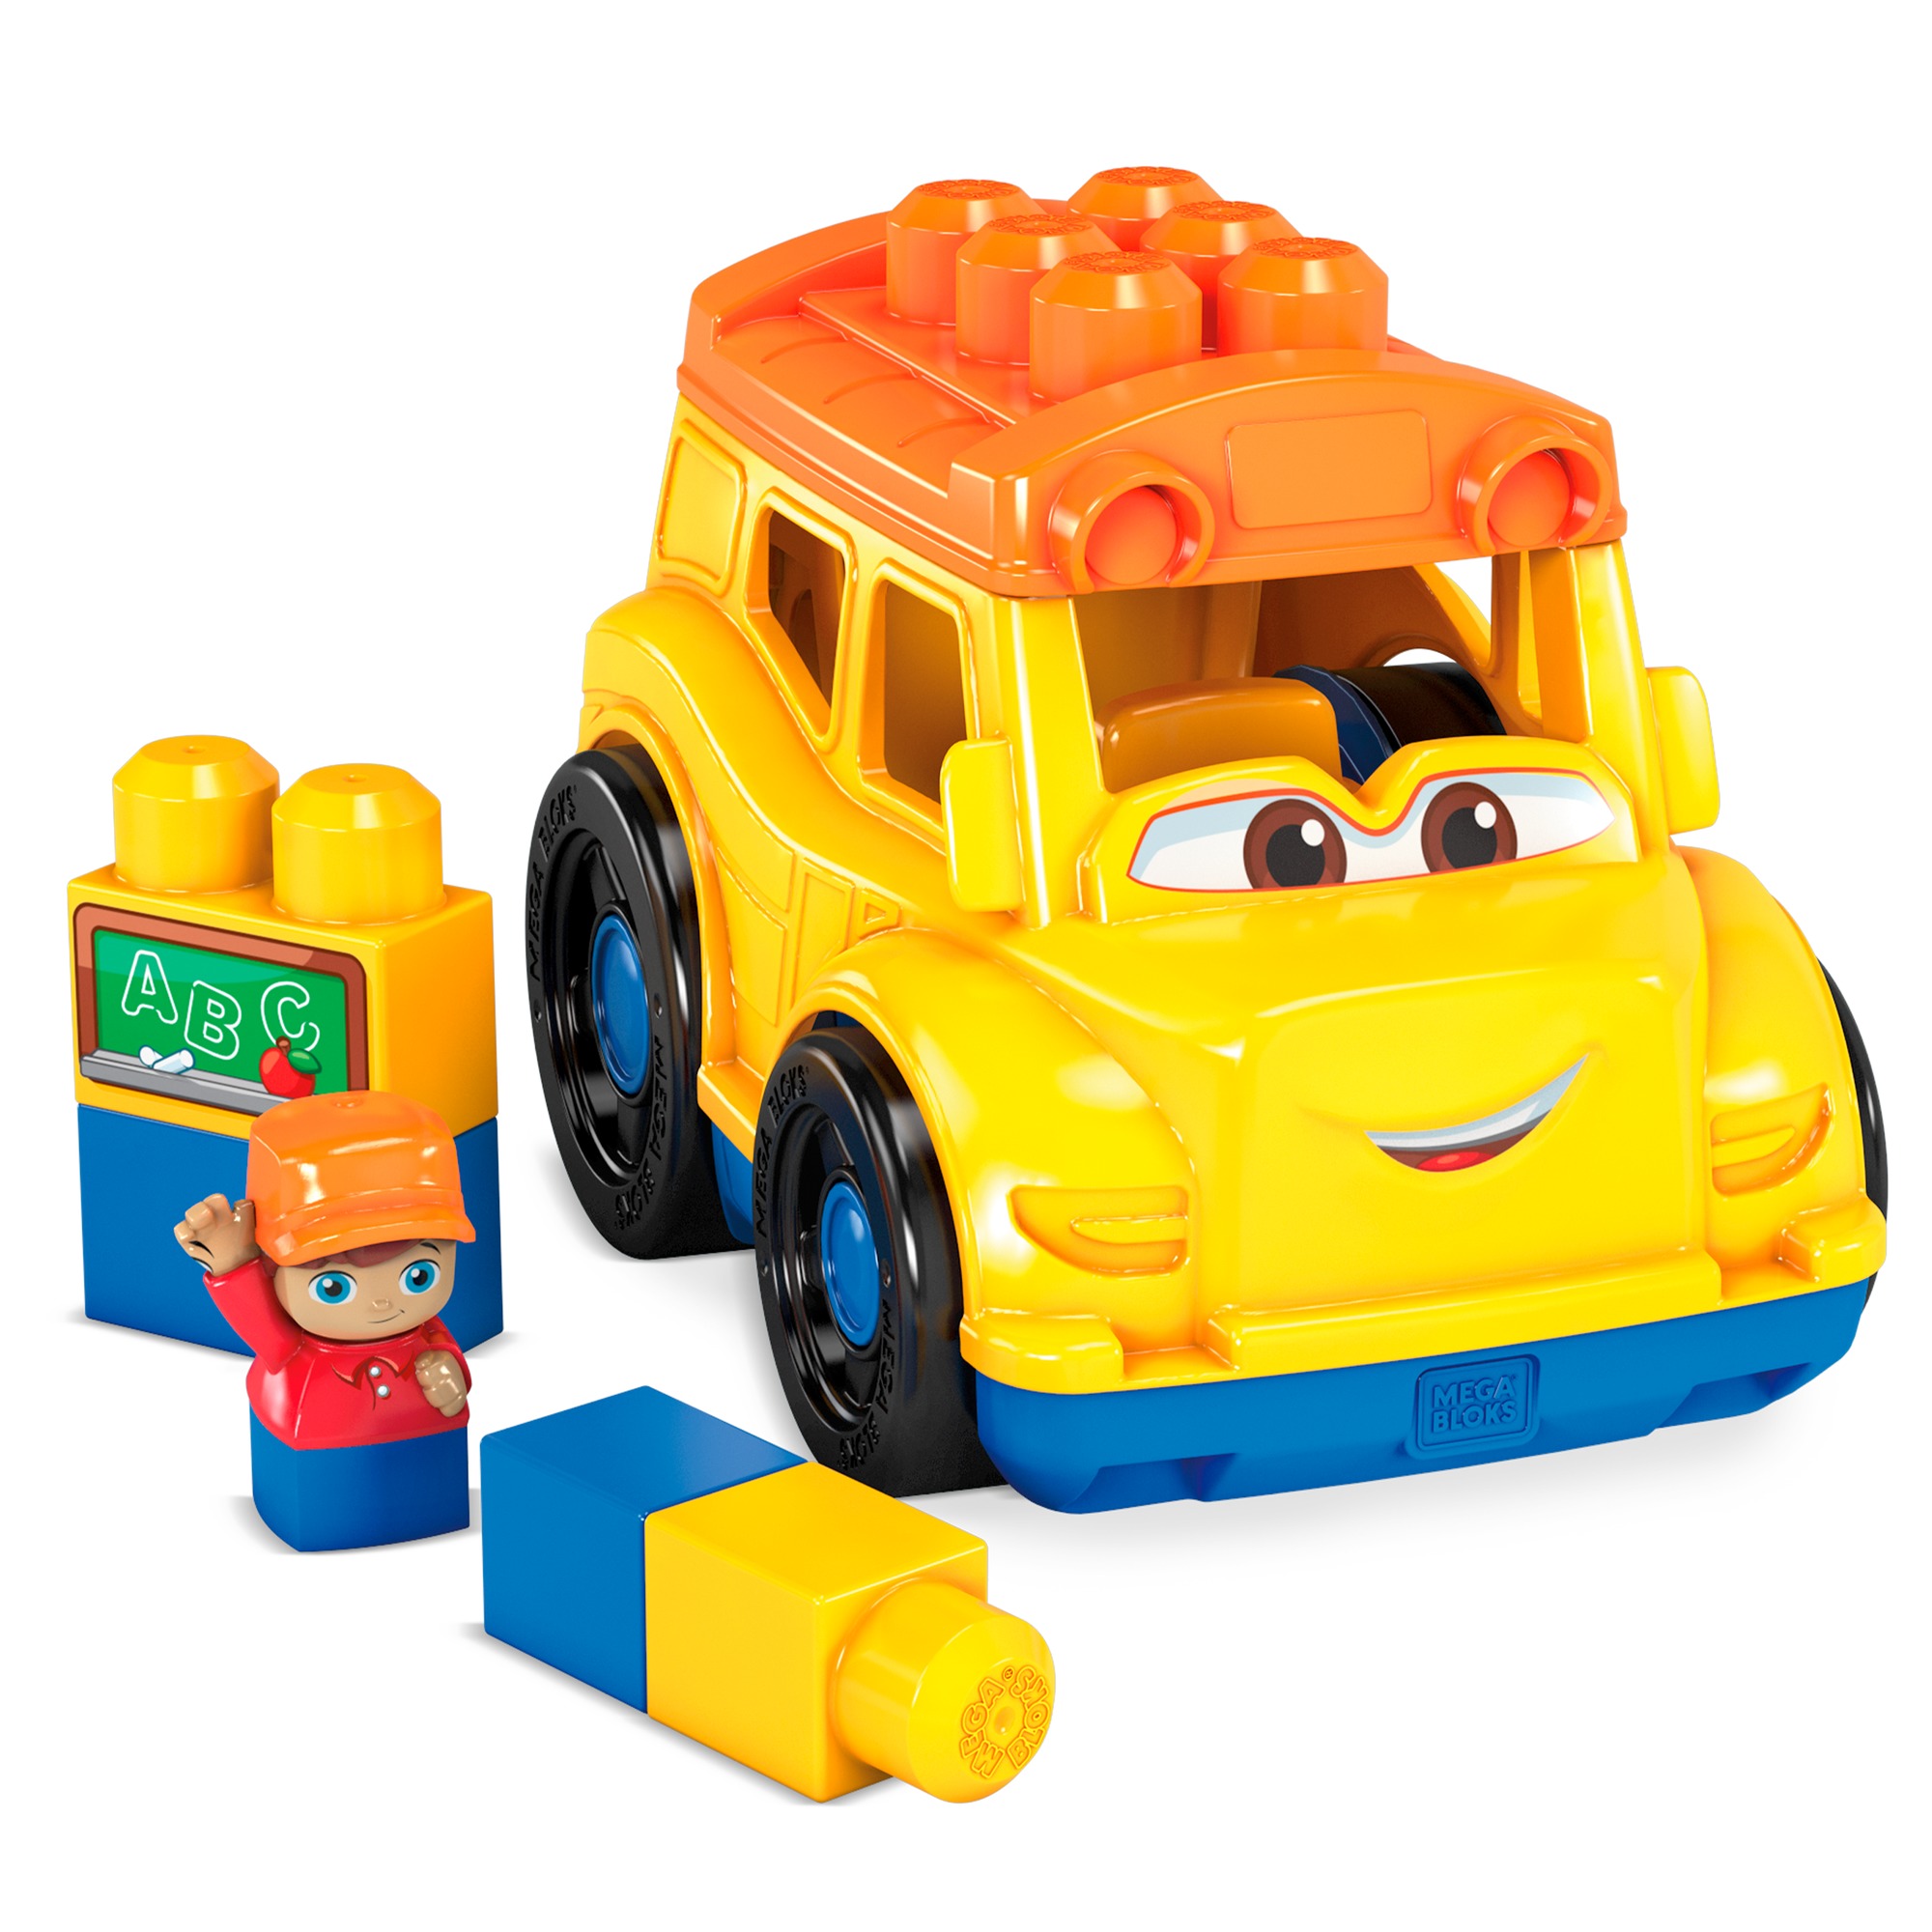 Mega Bloks First Builders Sonny School Bus with Big Building Blocks, Building Toys for Toddlers (6 Pieces) - image 1 of 8